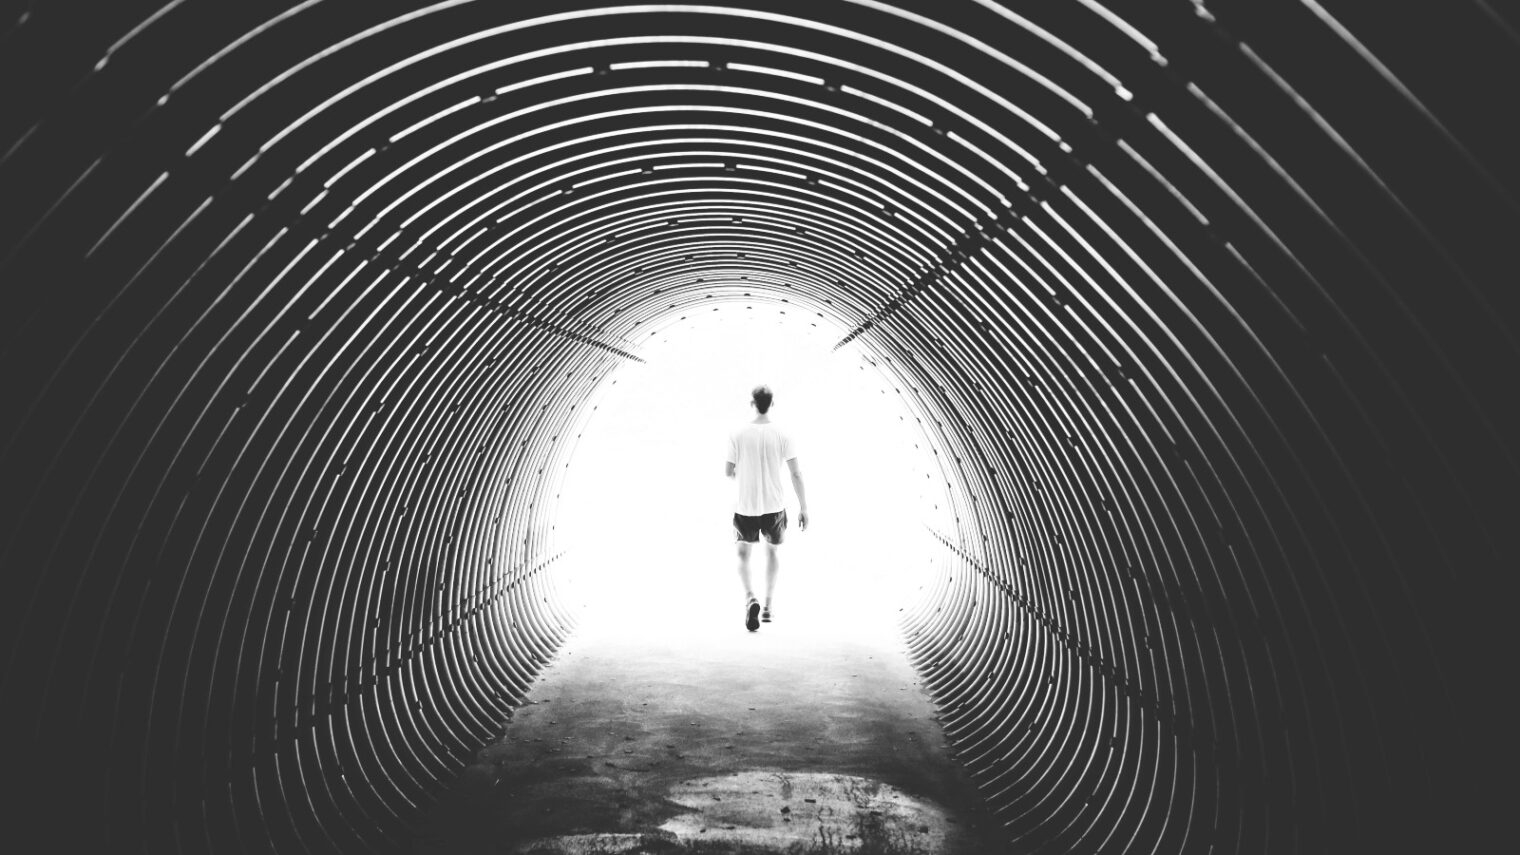 Is Omicron the light at the end of the tunnel? Photo by Kasuma from Pexels